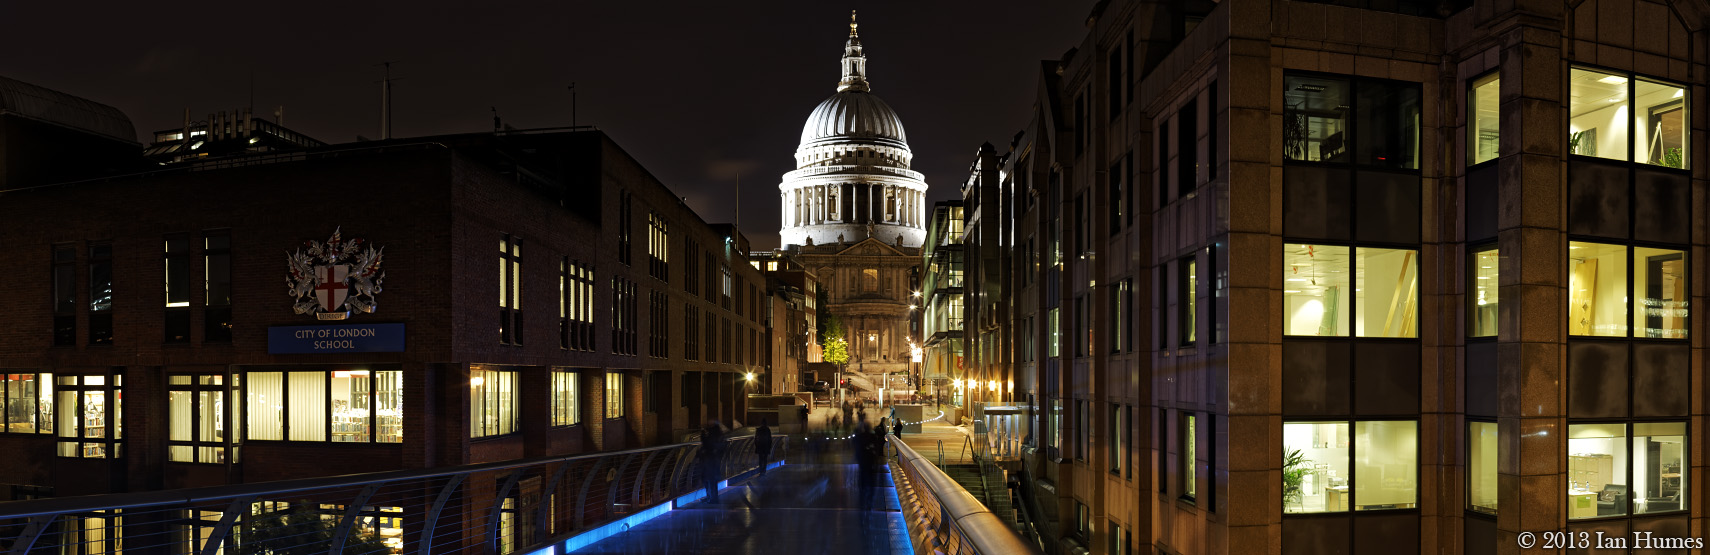 St. Paul's Cathedral - London